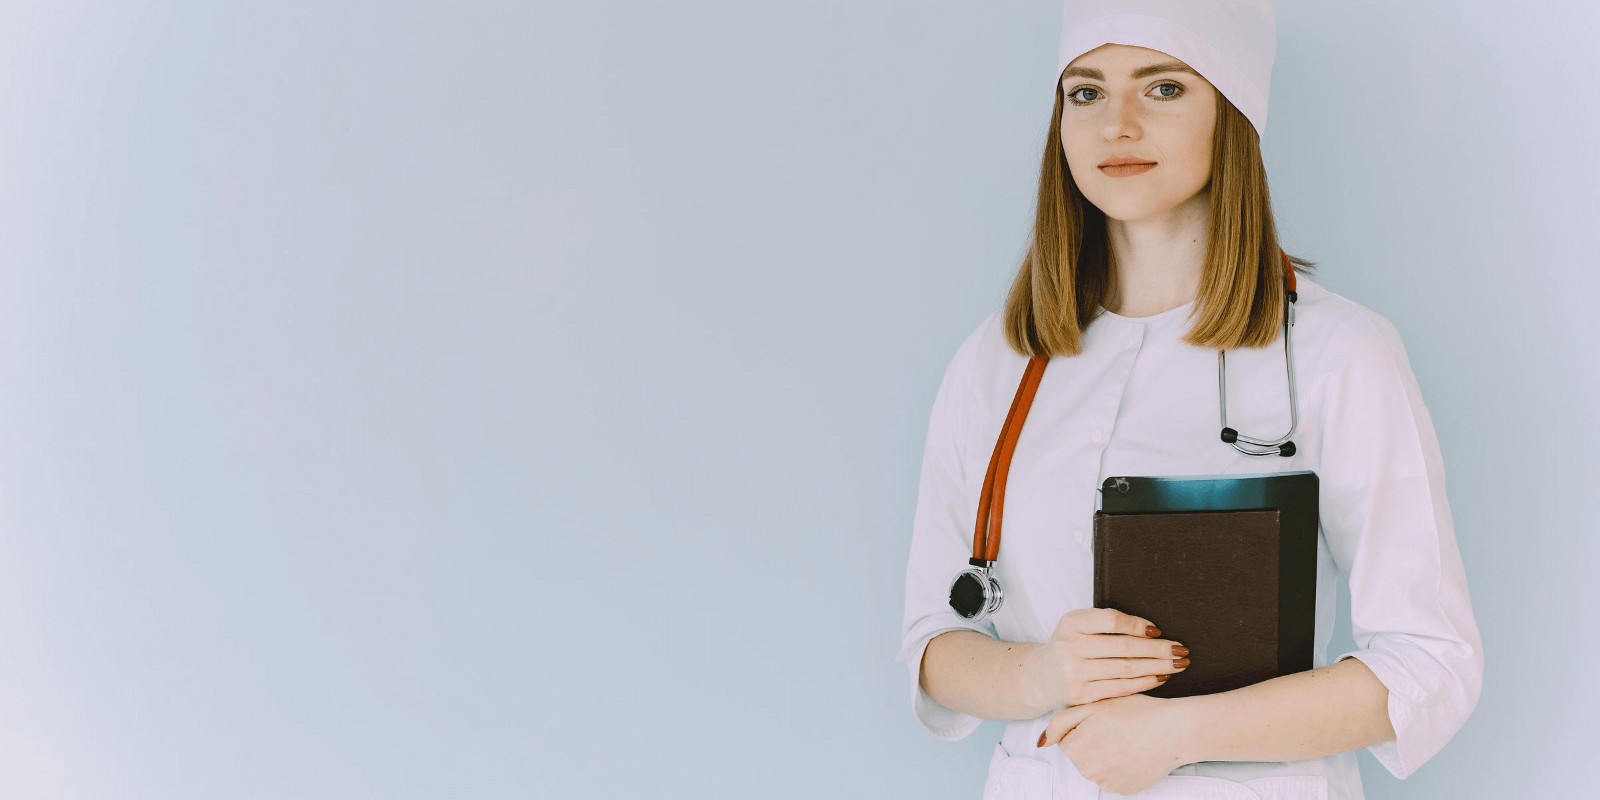 Image of Woman doctor wearing stethoscope and holding medical files